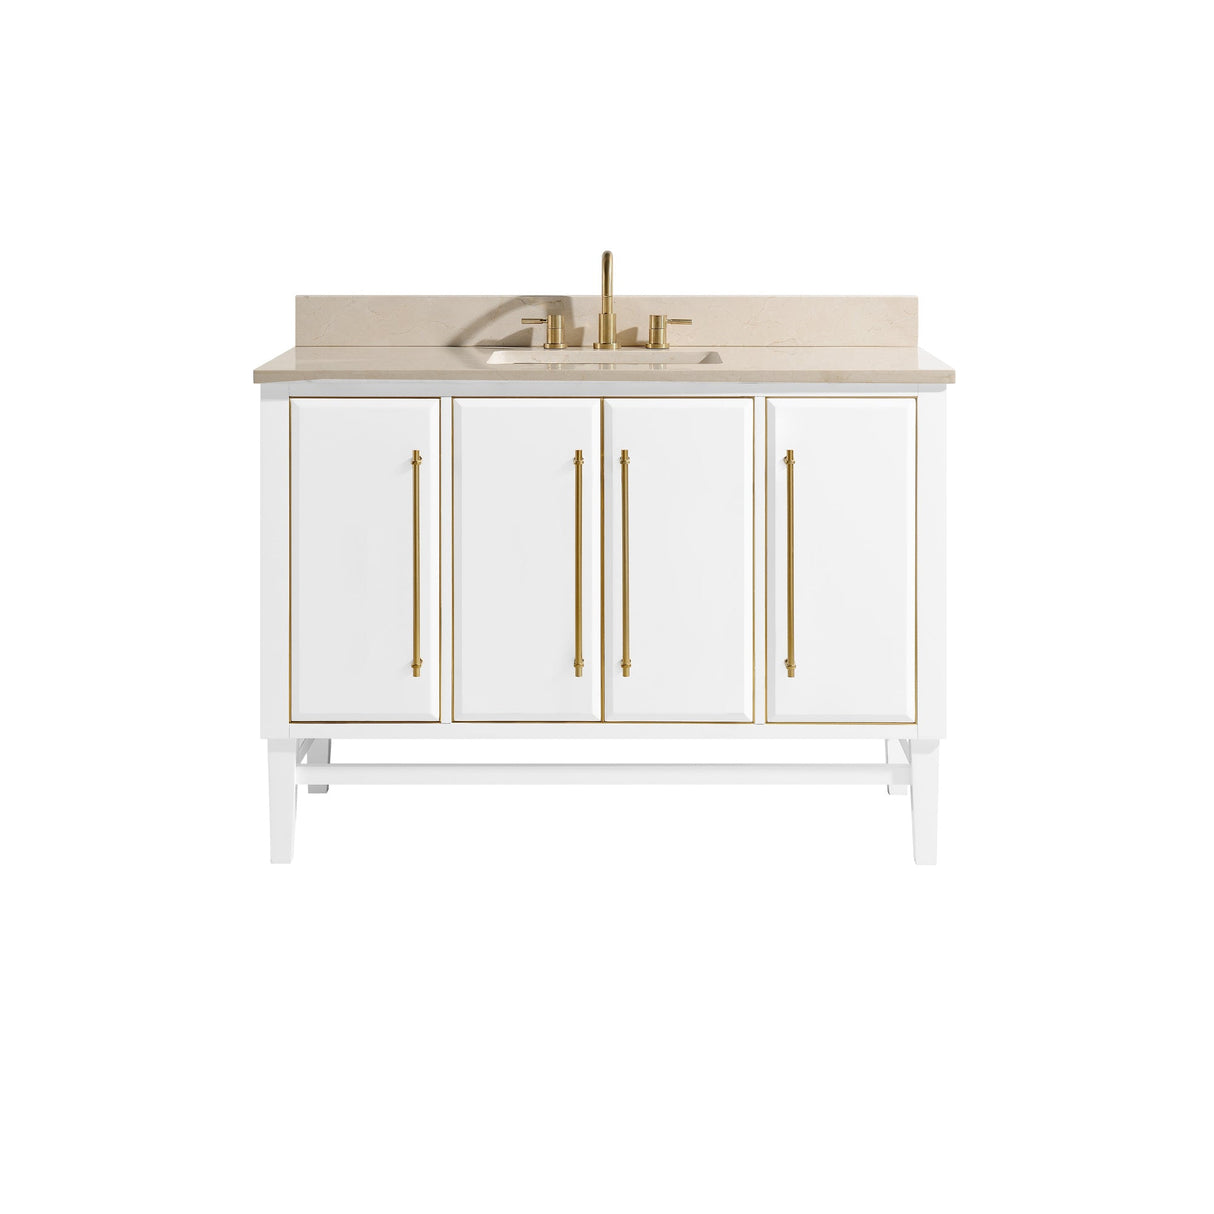 Avanity Mason 49 in. Vanity Combo in White with Gold Trim and Crema Marfil Marble Top